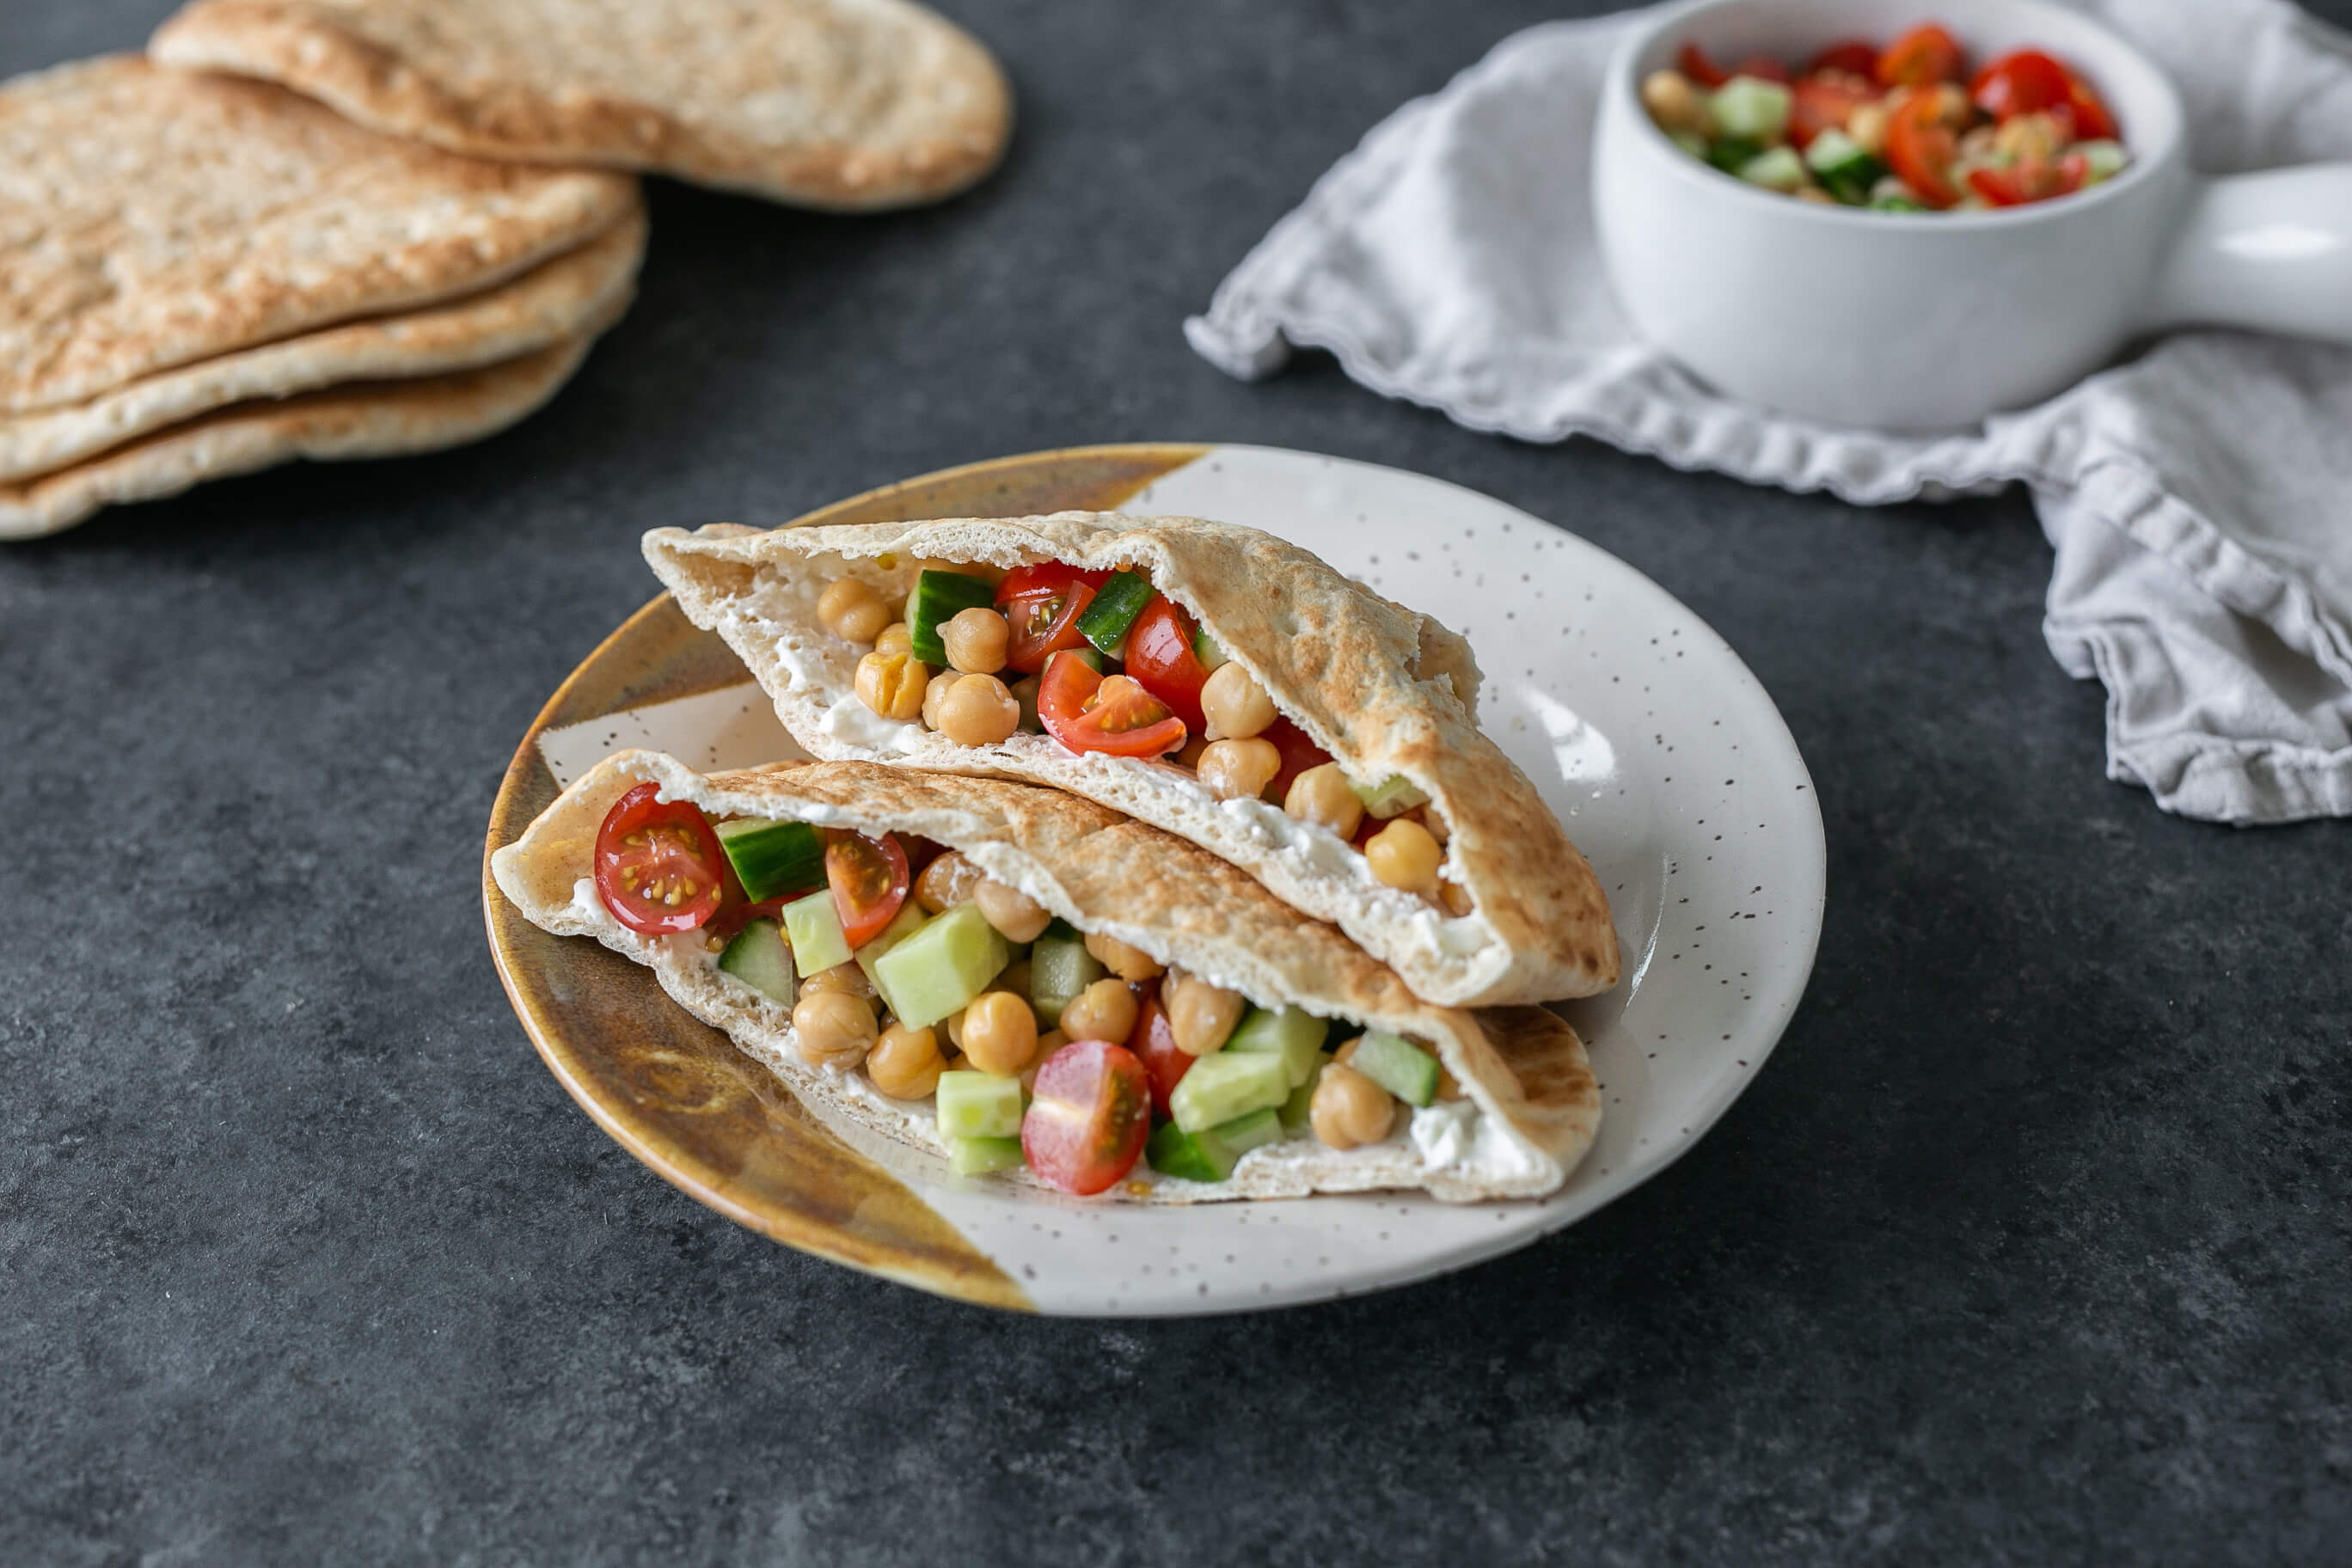 20 Healthy Meals to Help Your Clients Eat Healthy on a Tight Budget: Chopped Salad Pitas